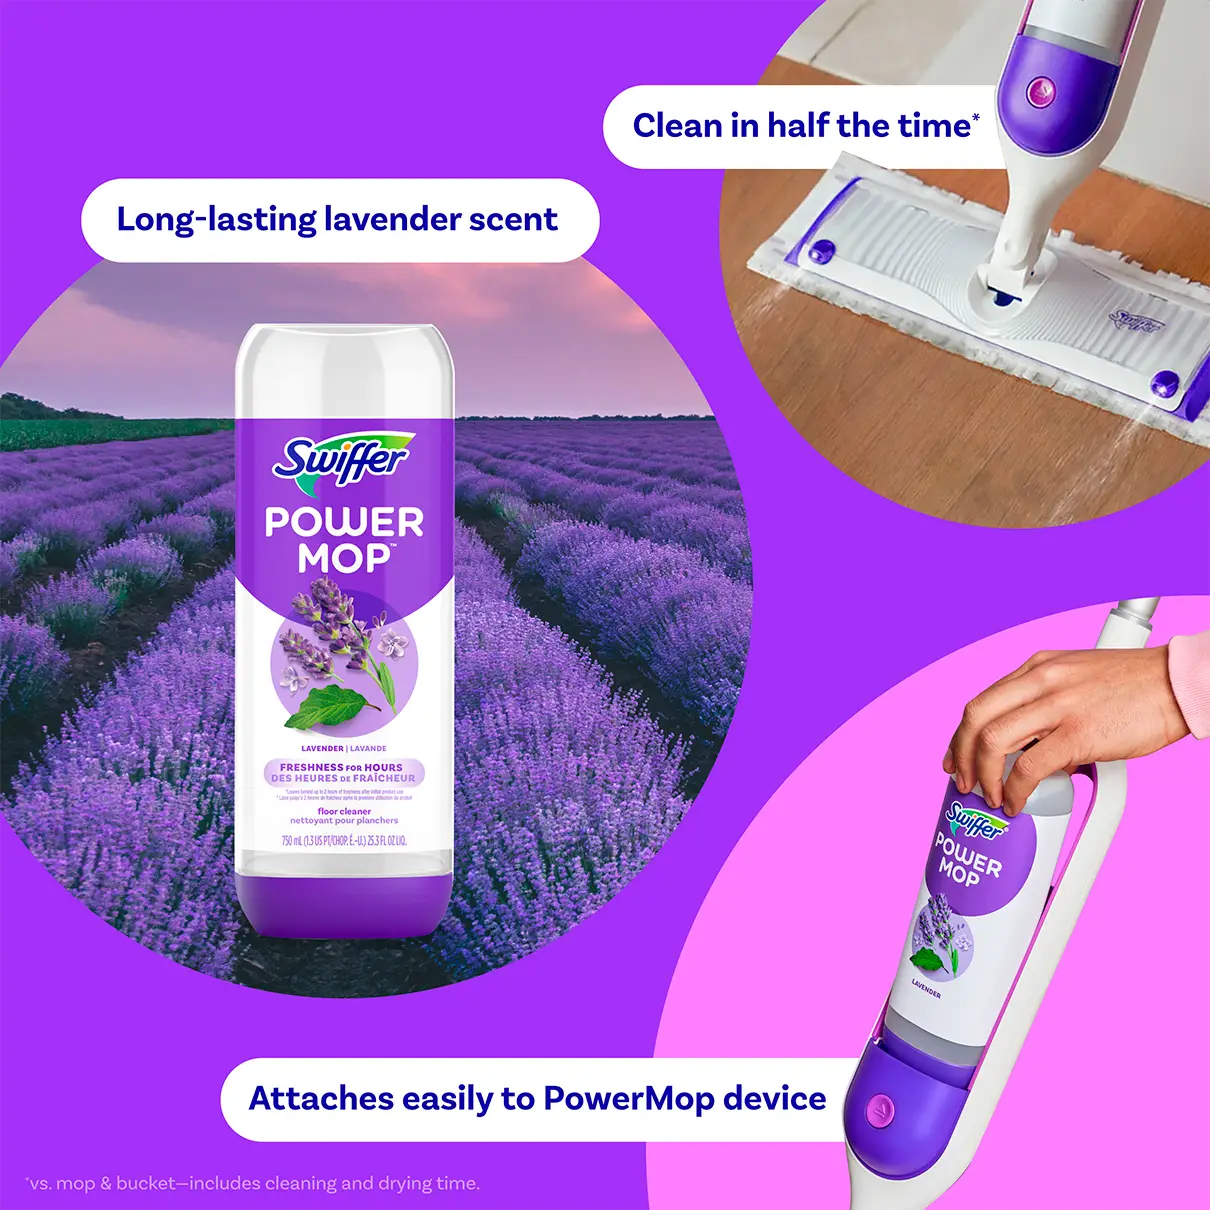 Great Value Automatic Spray Mop Solution Lavender-Scented Refill